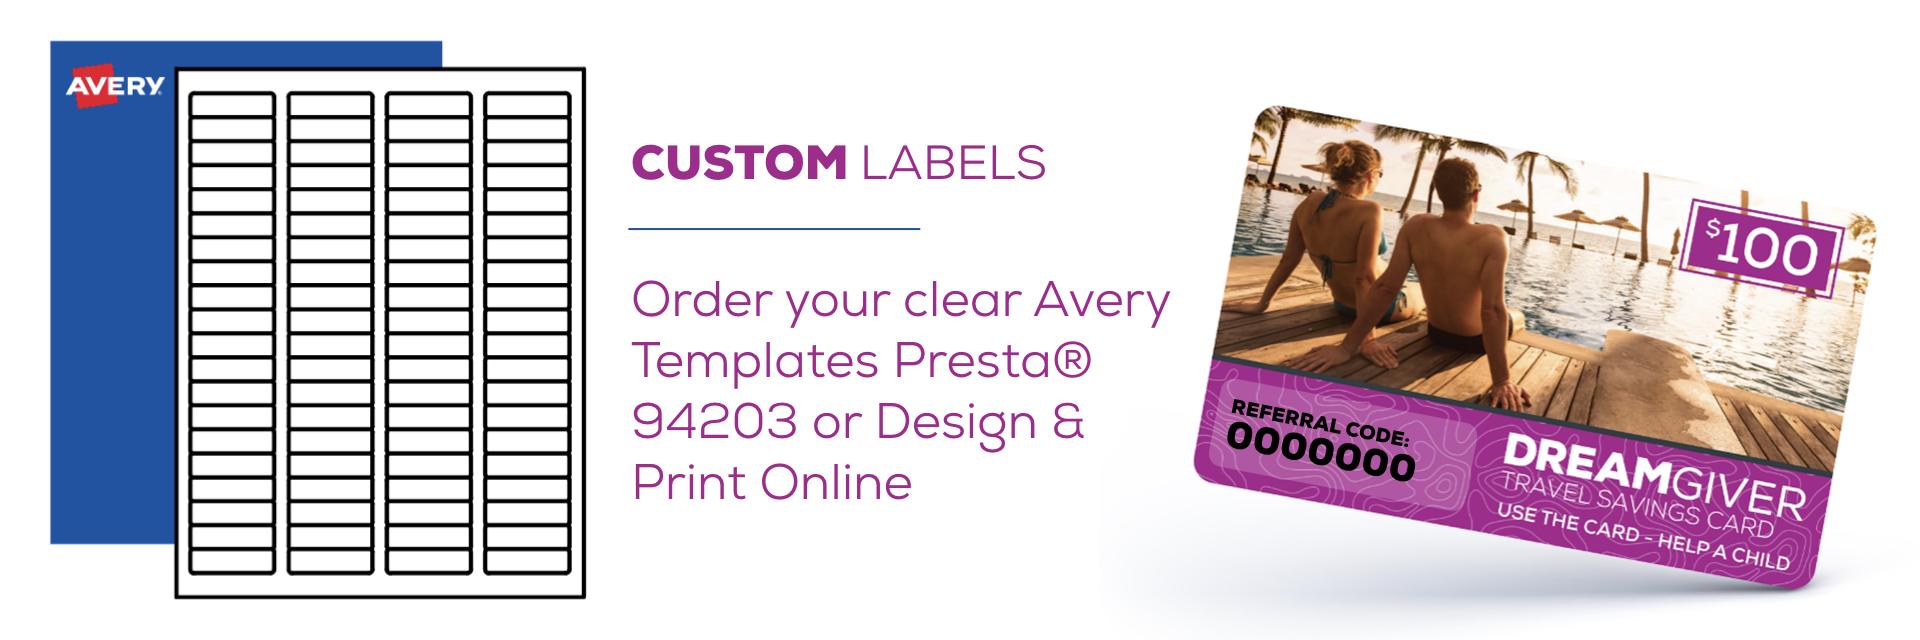 Labels from Avery.com